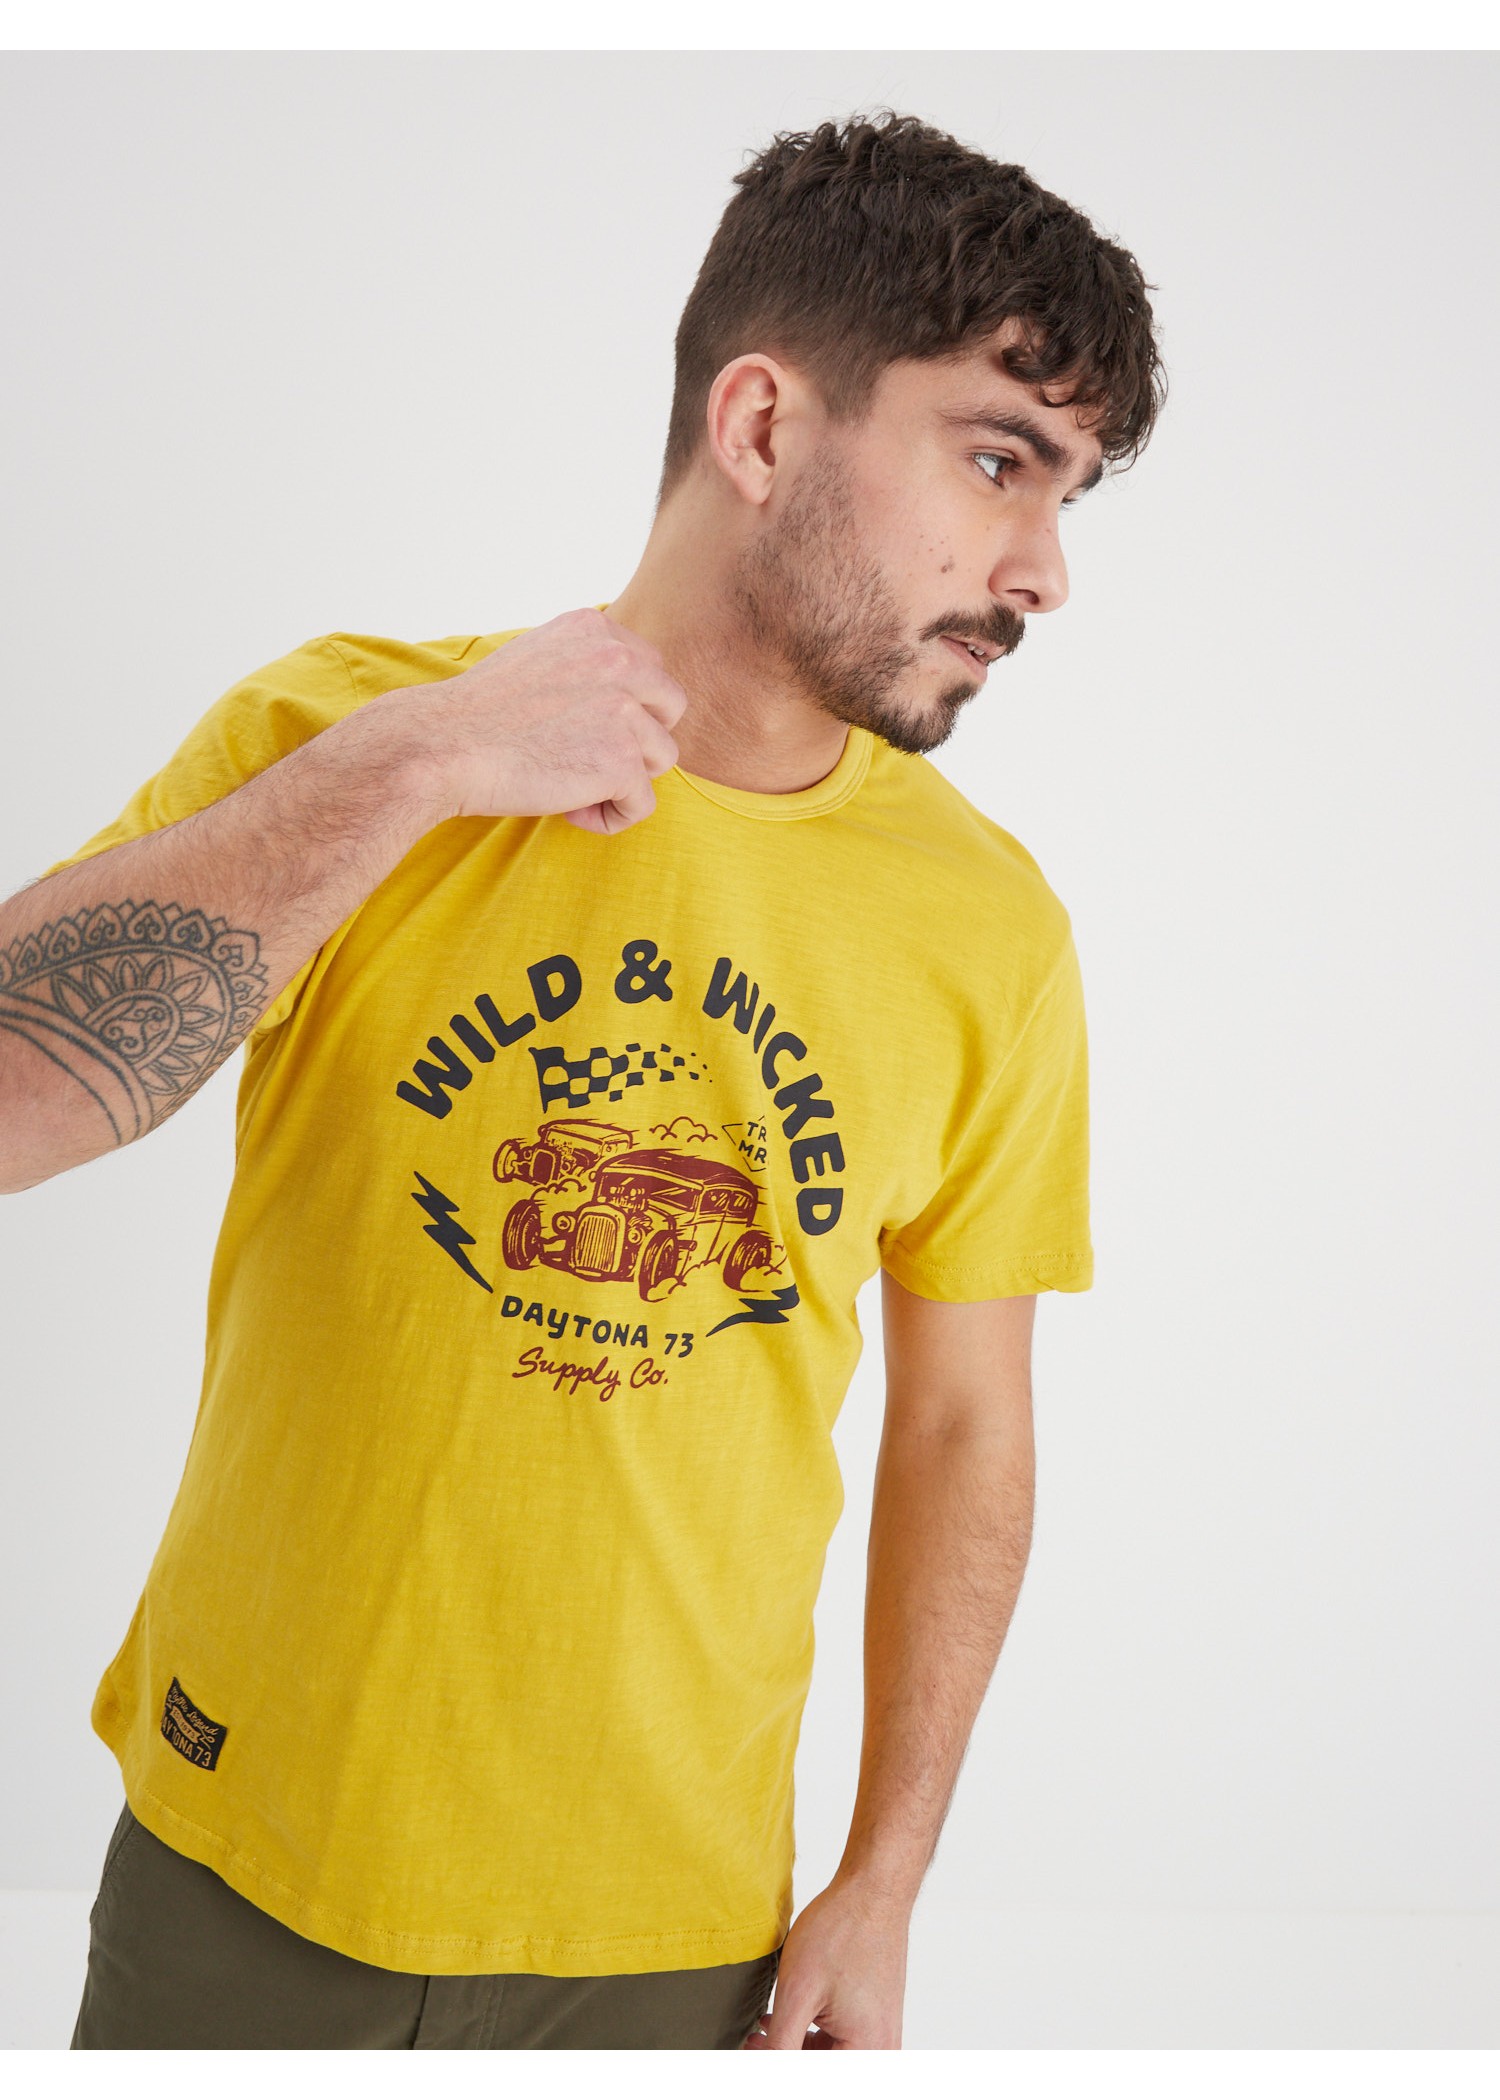 Wicked - T-shirt vintage homme